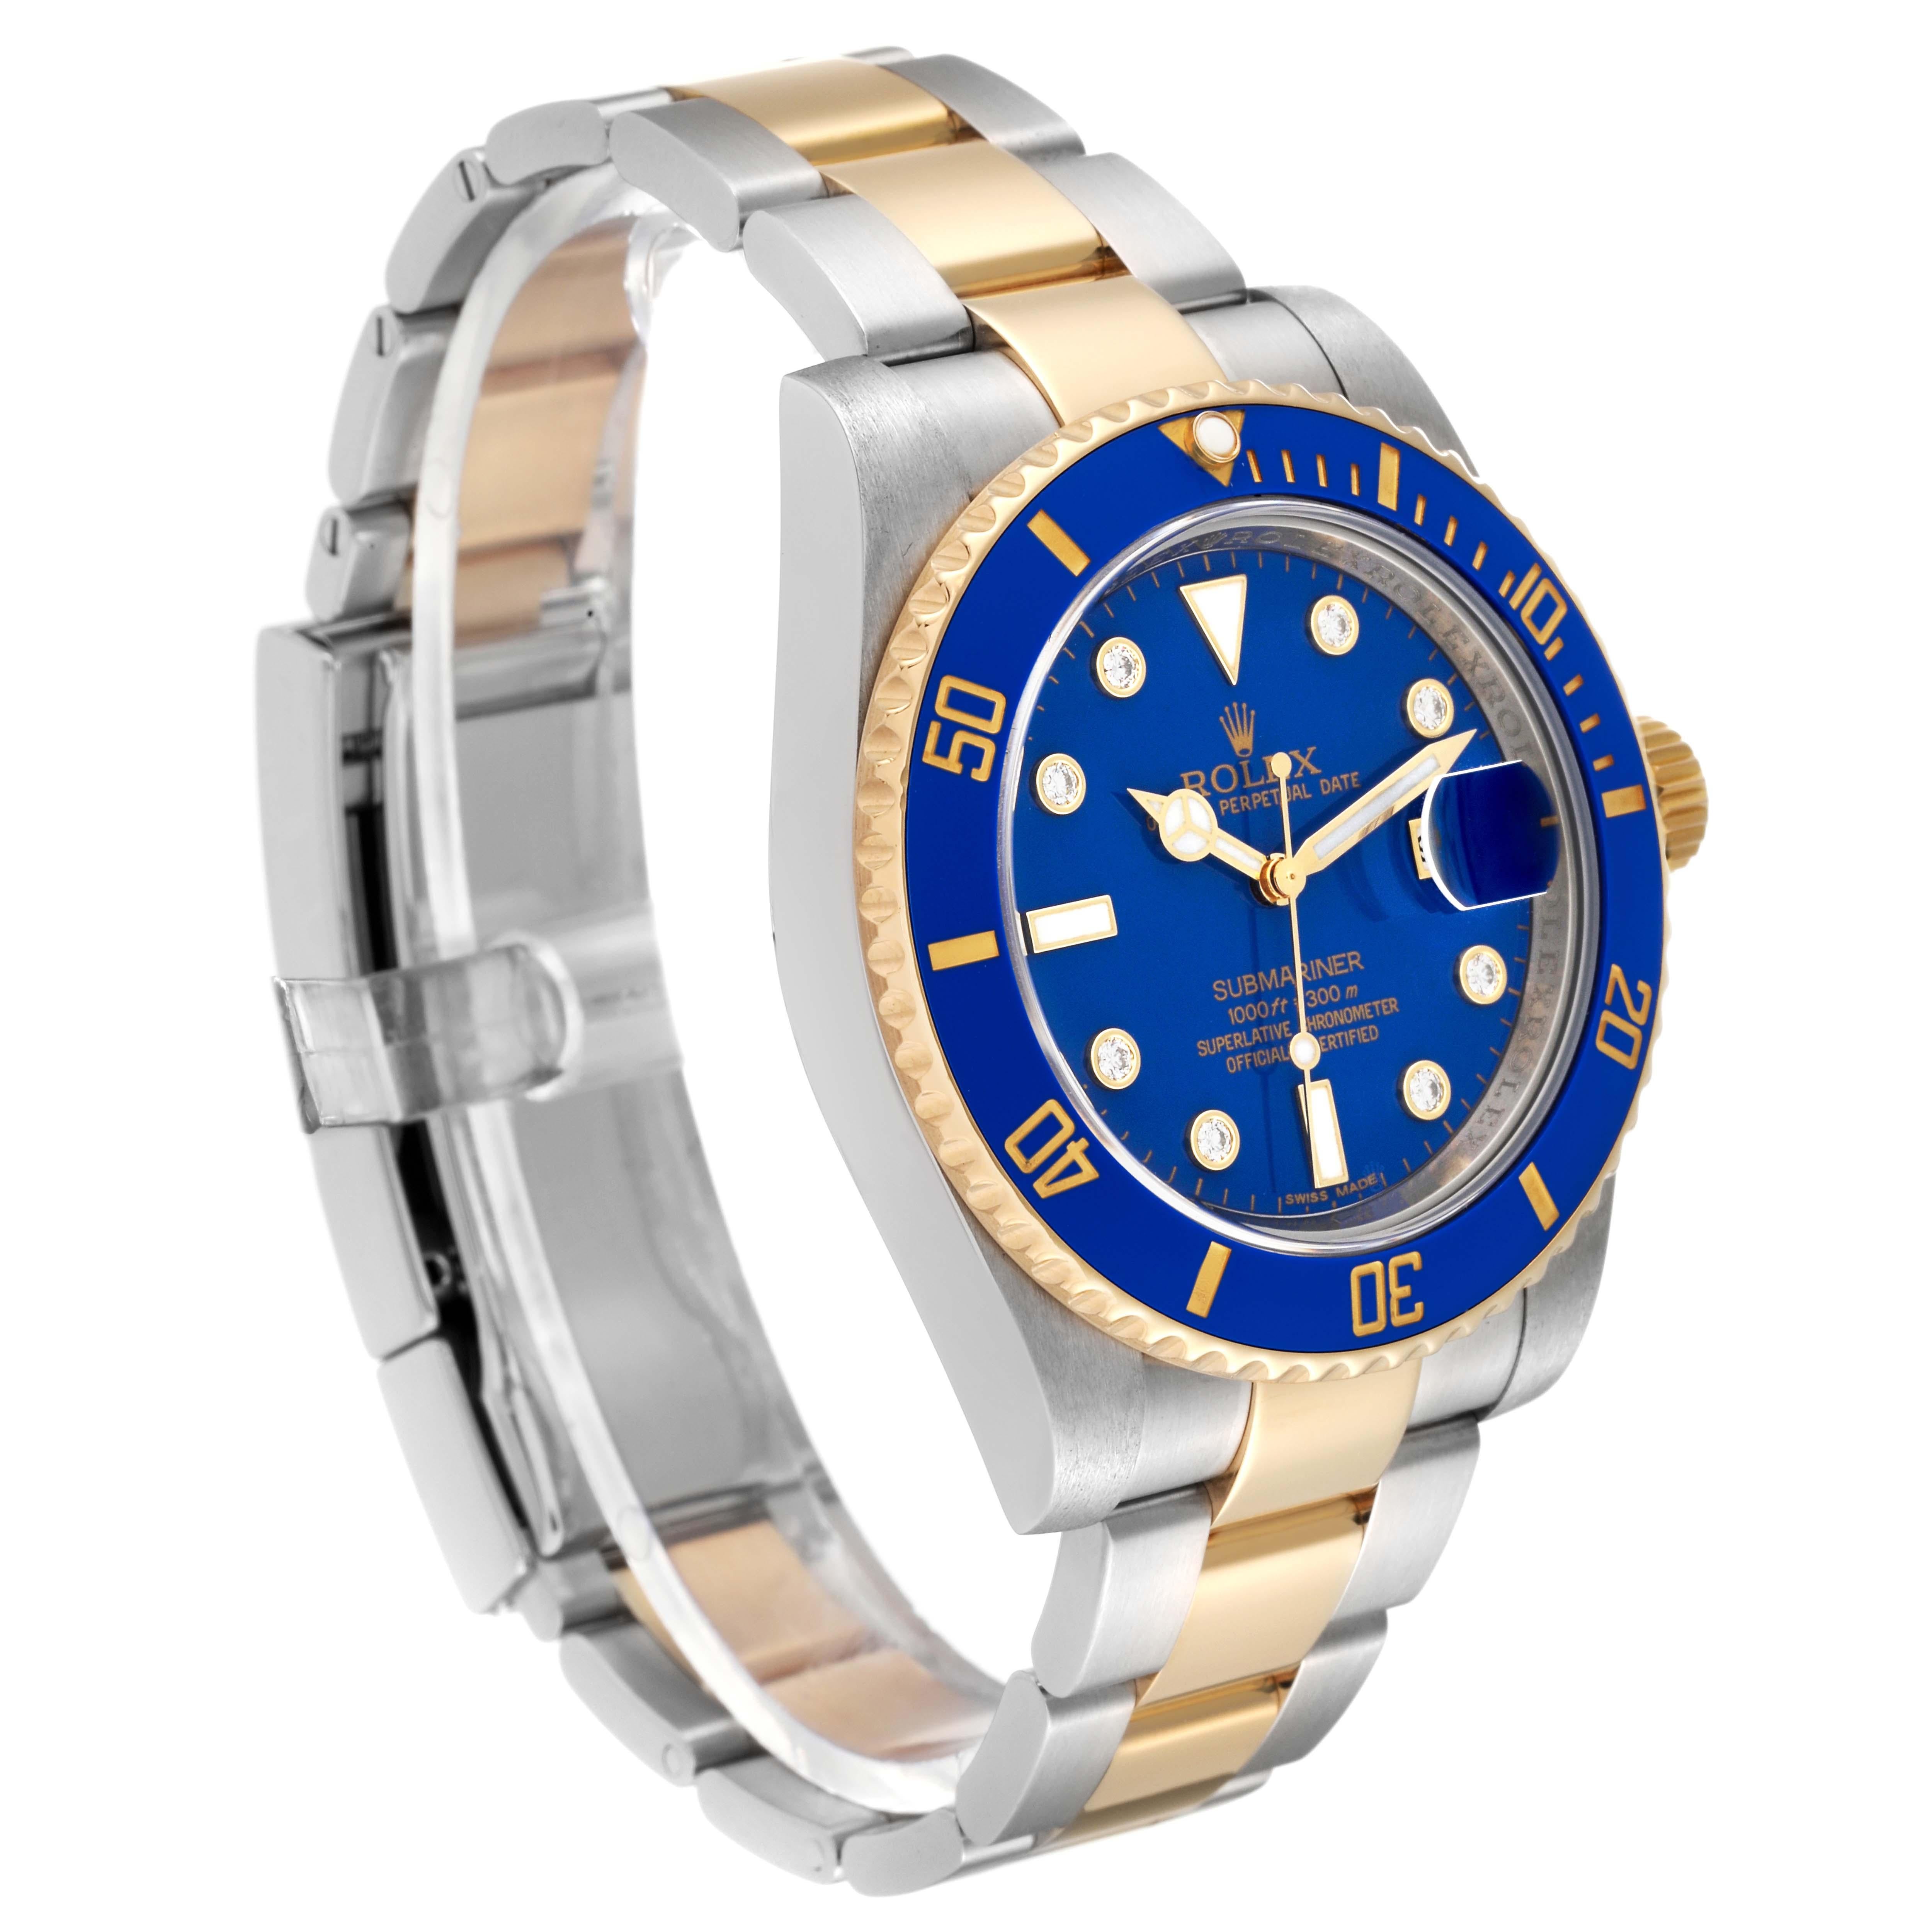 Rolex Submariner Steel Yellow Gold Blue Diamond Dial Mens Watch 116613 In Excellent Condition For Sale In Atlanta, GA